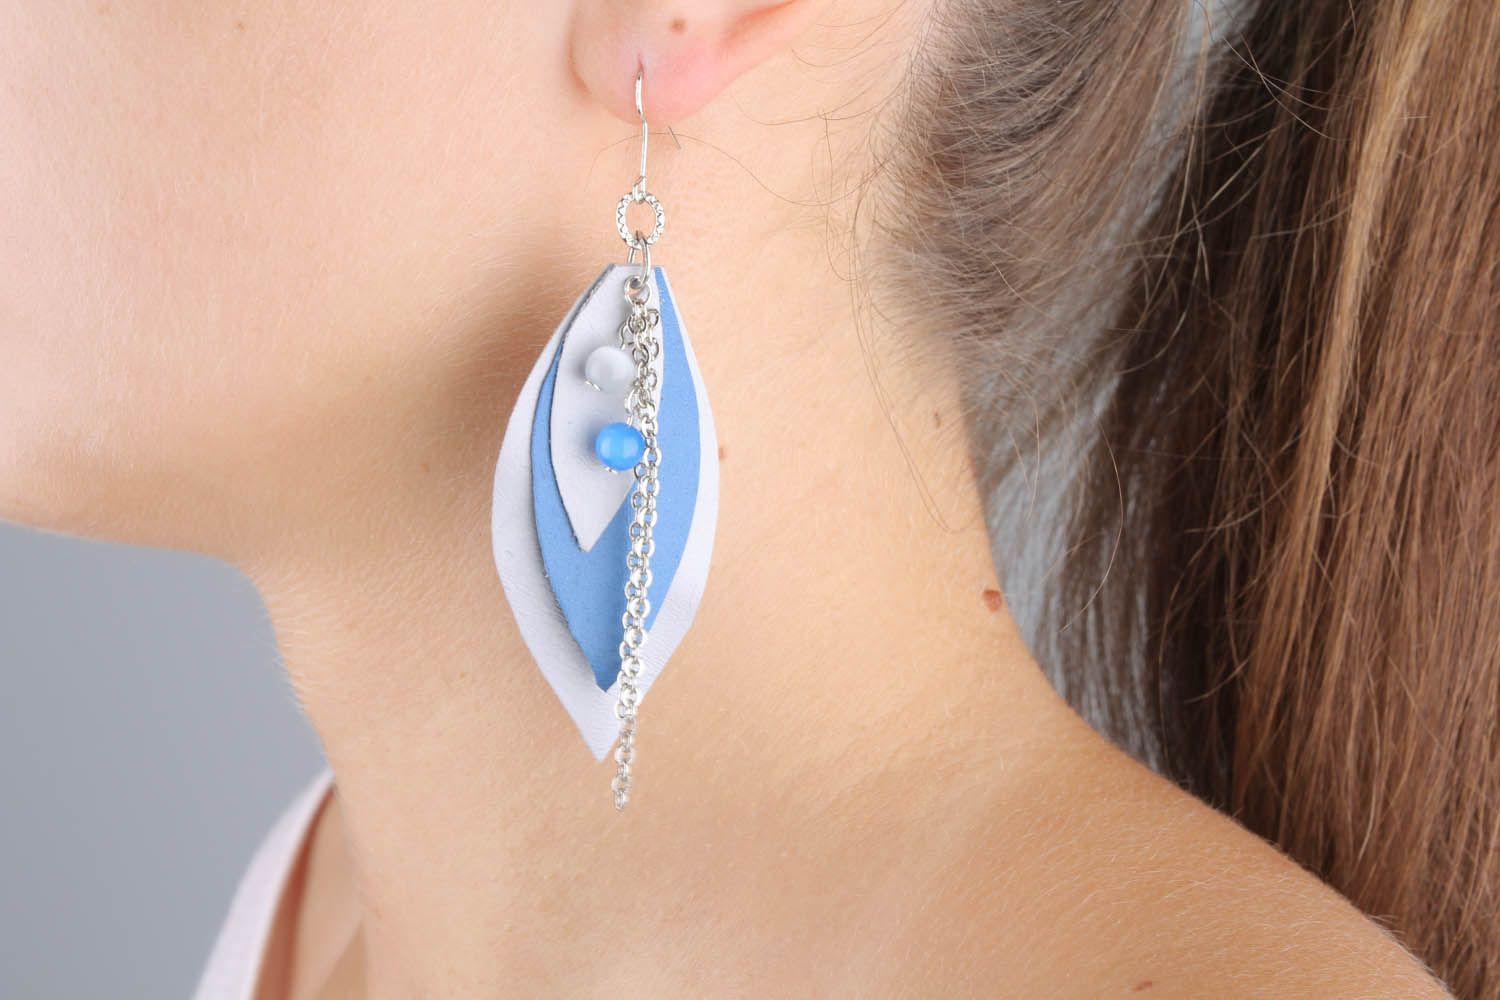 Earrings made of leather and metal photo 1